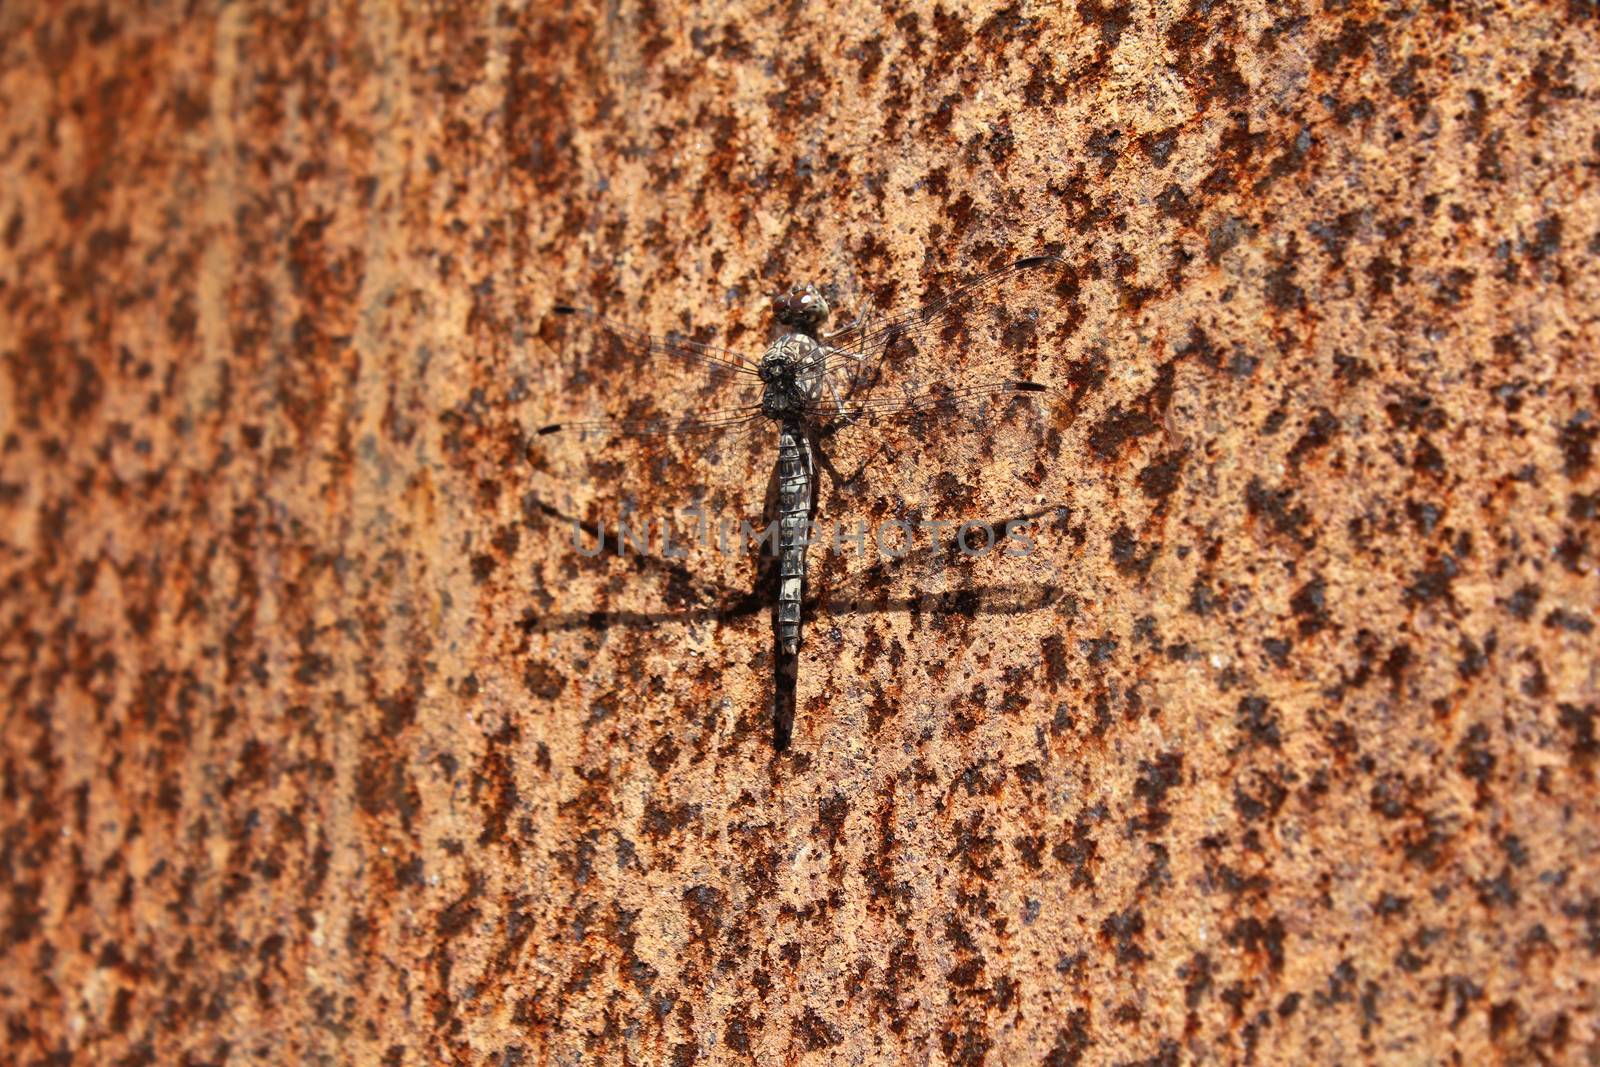 A large grey, adult dragonfly rests on a rusted metal sheet in the sun, its wings are transparent, with only the shadow of the wings clearly visible.